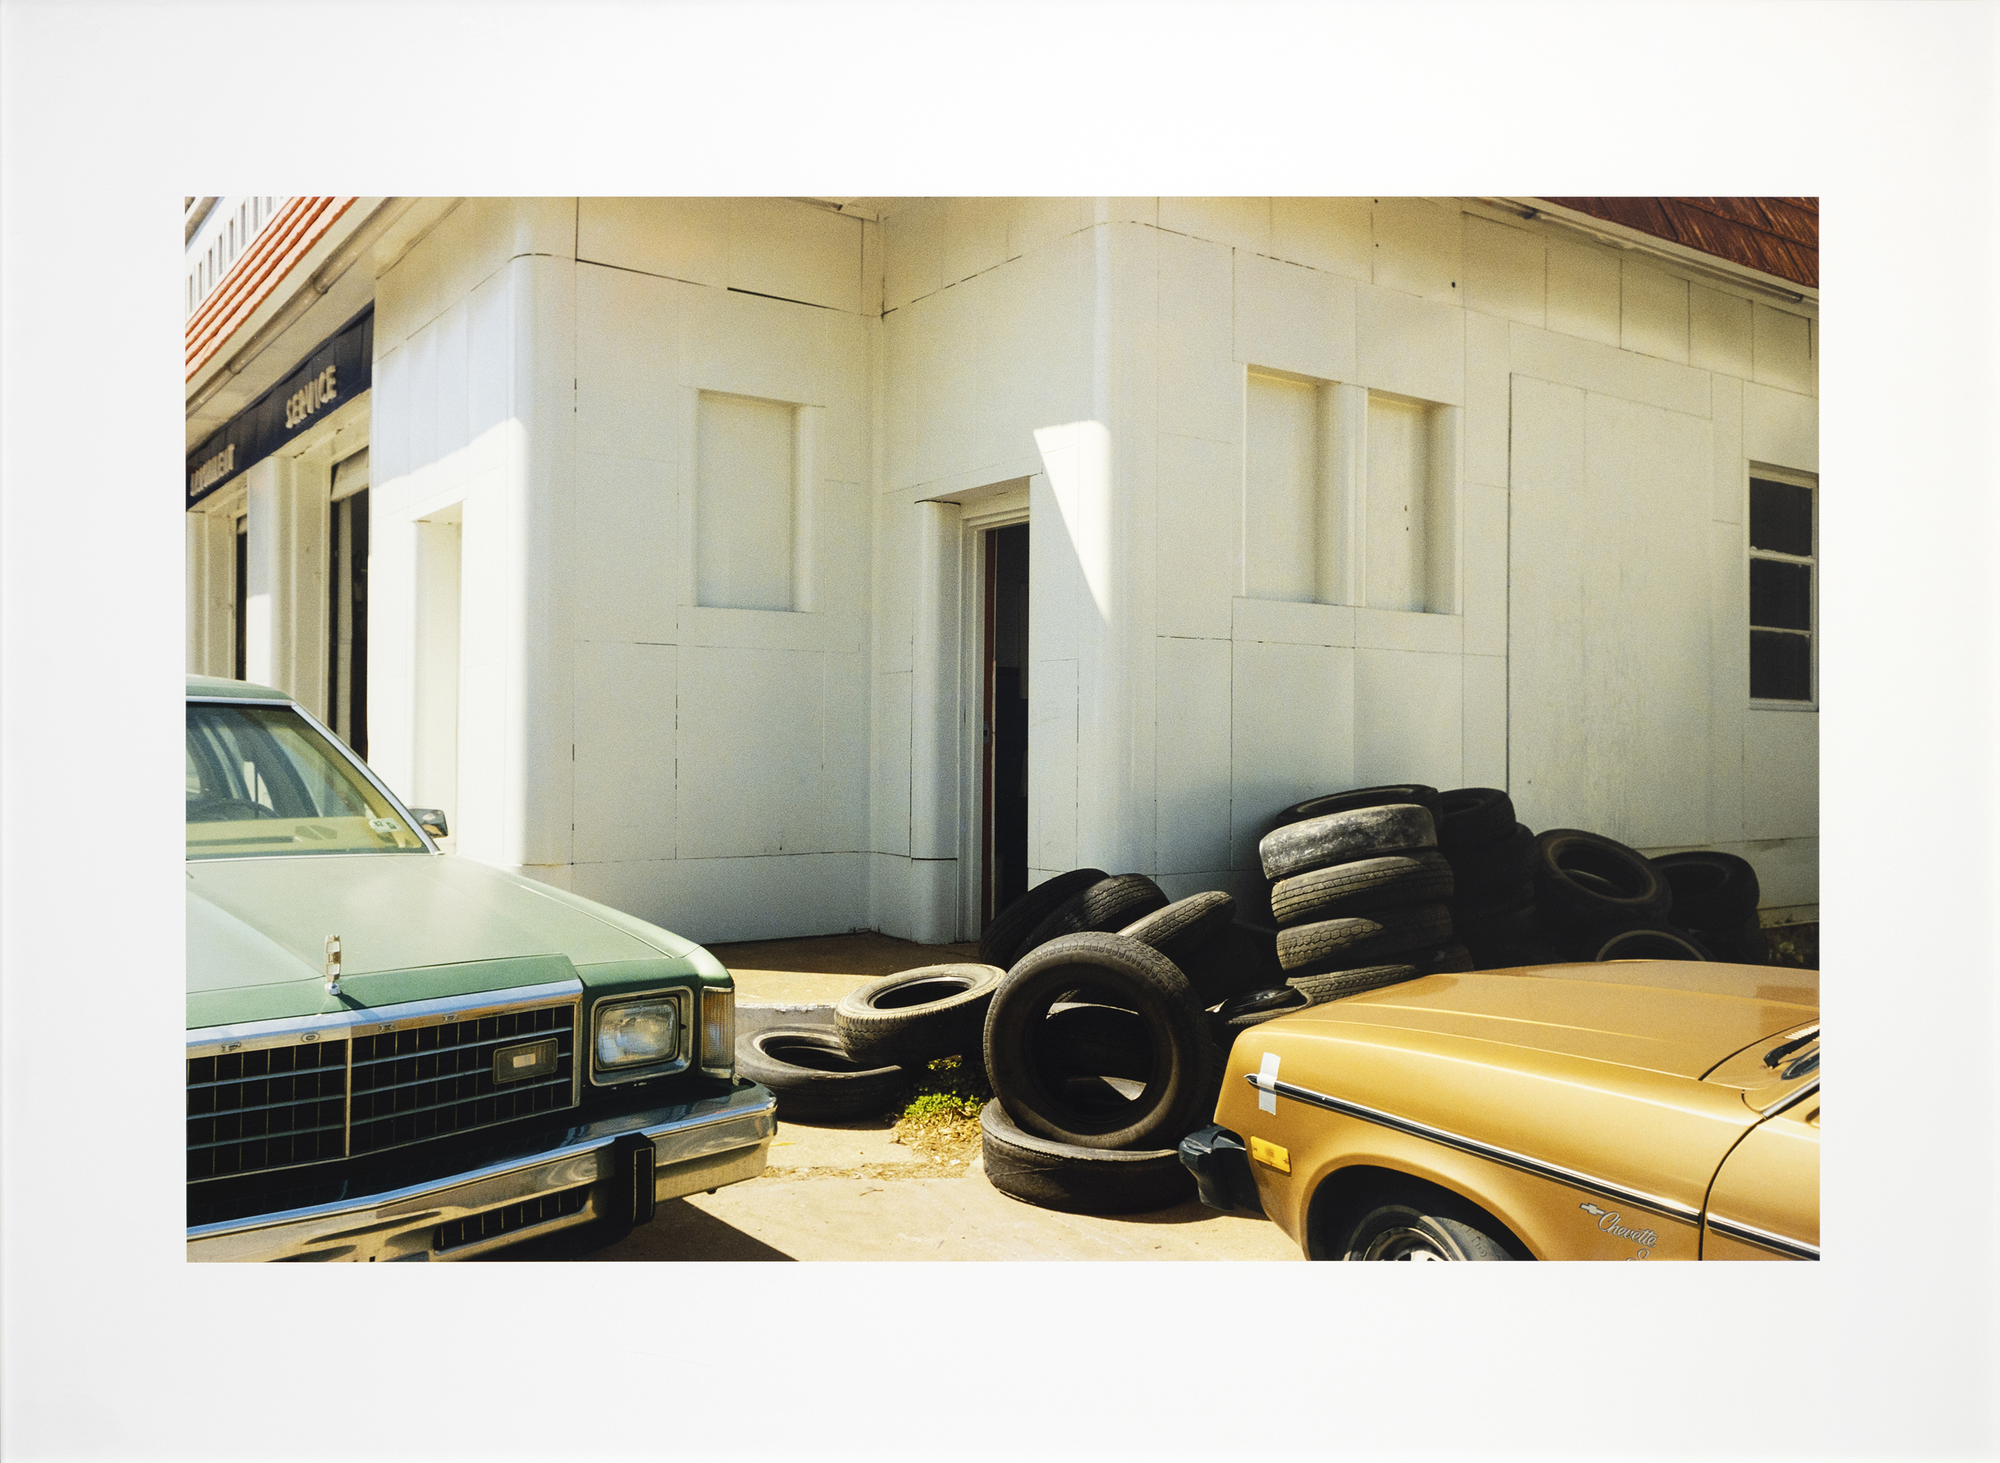 WILLIAM B. EGGLESTON - Untitled (From Democratic Forest) - archival pigment print - 31 1/2 x 48 in.